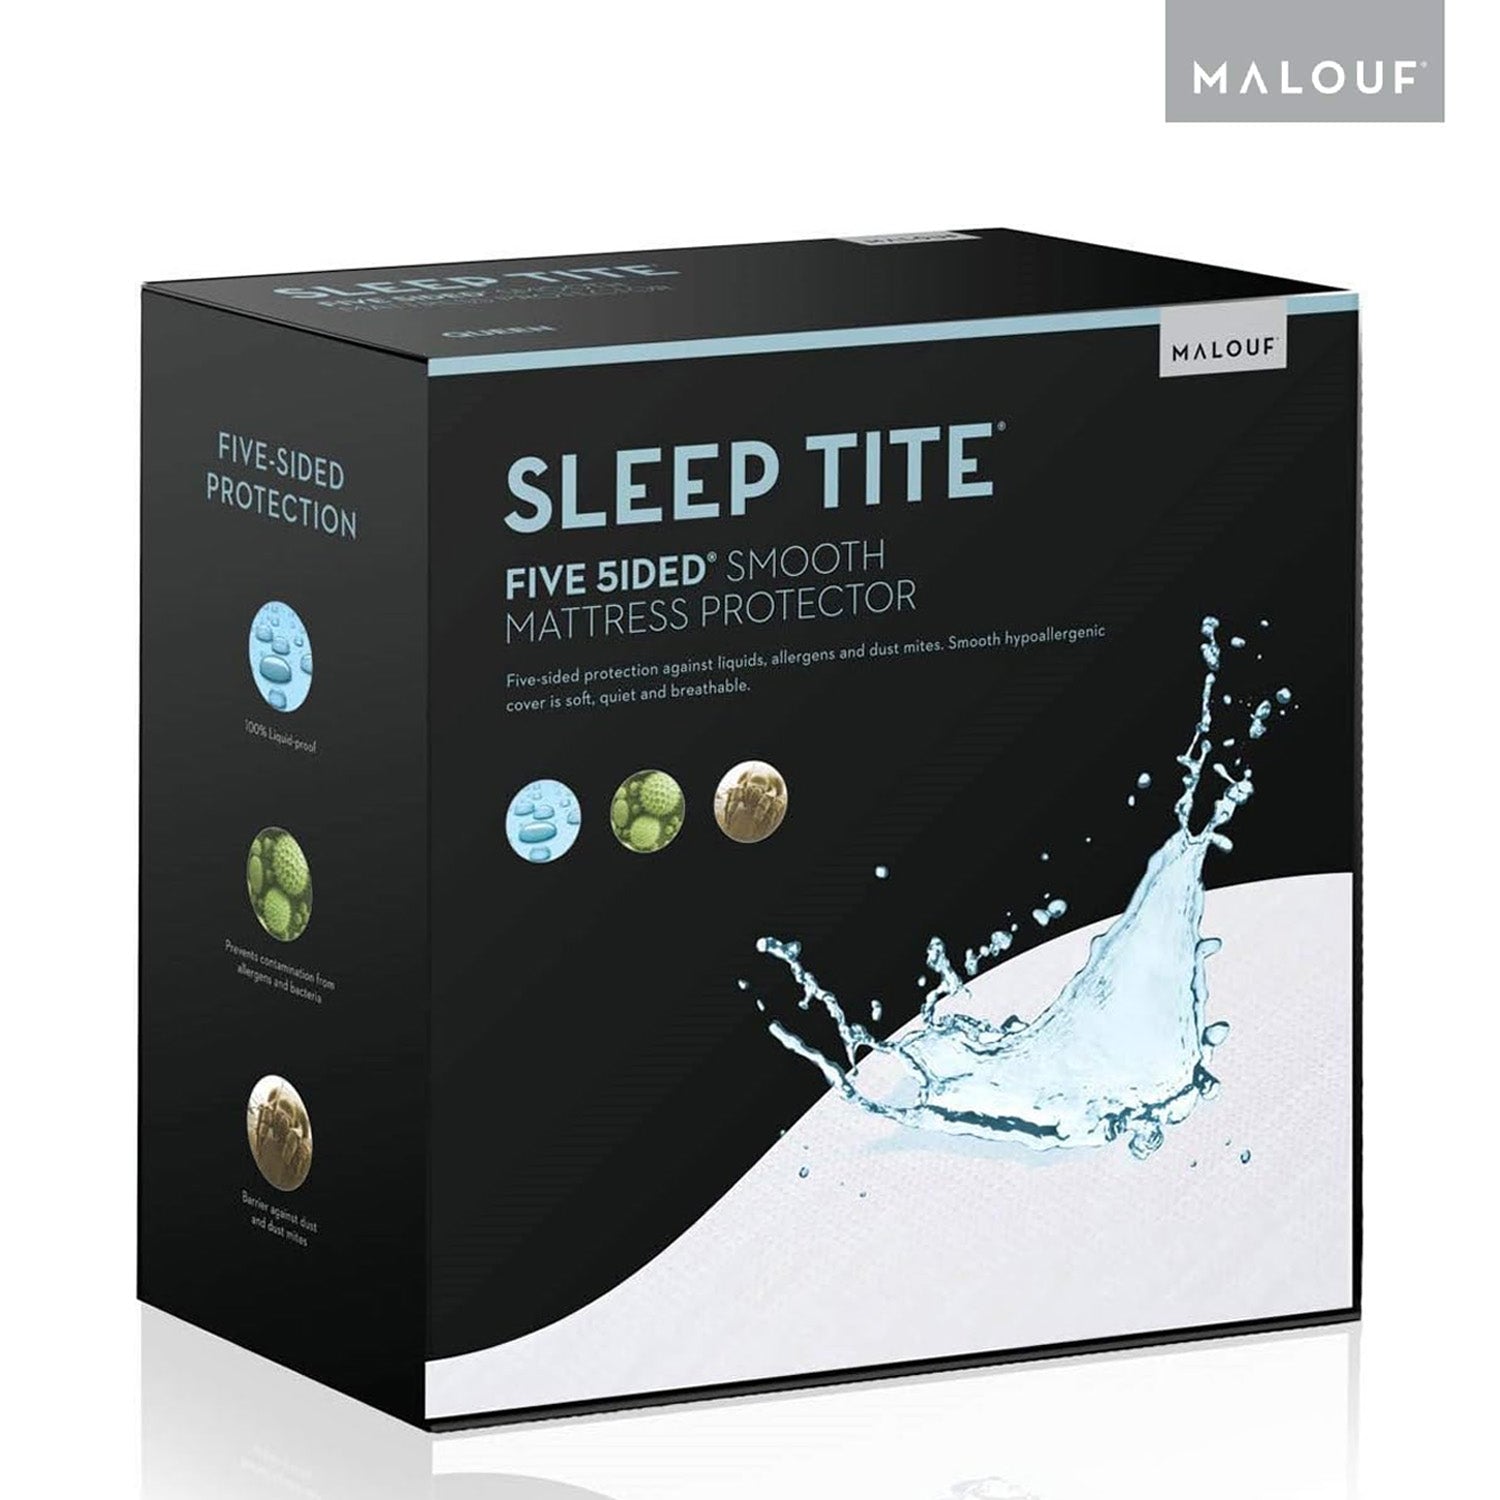 Malouf Sleeptite Five Sided® Smooth Mattress Protector